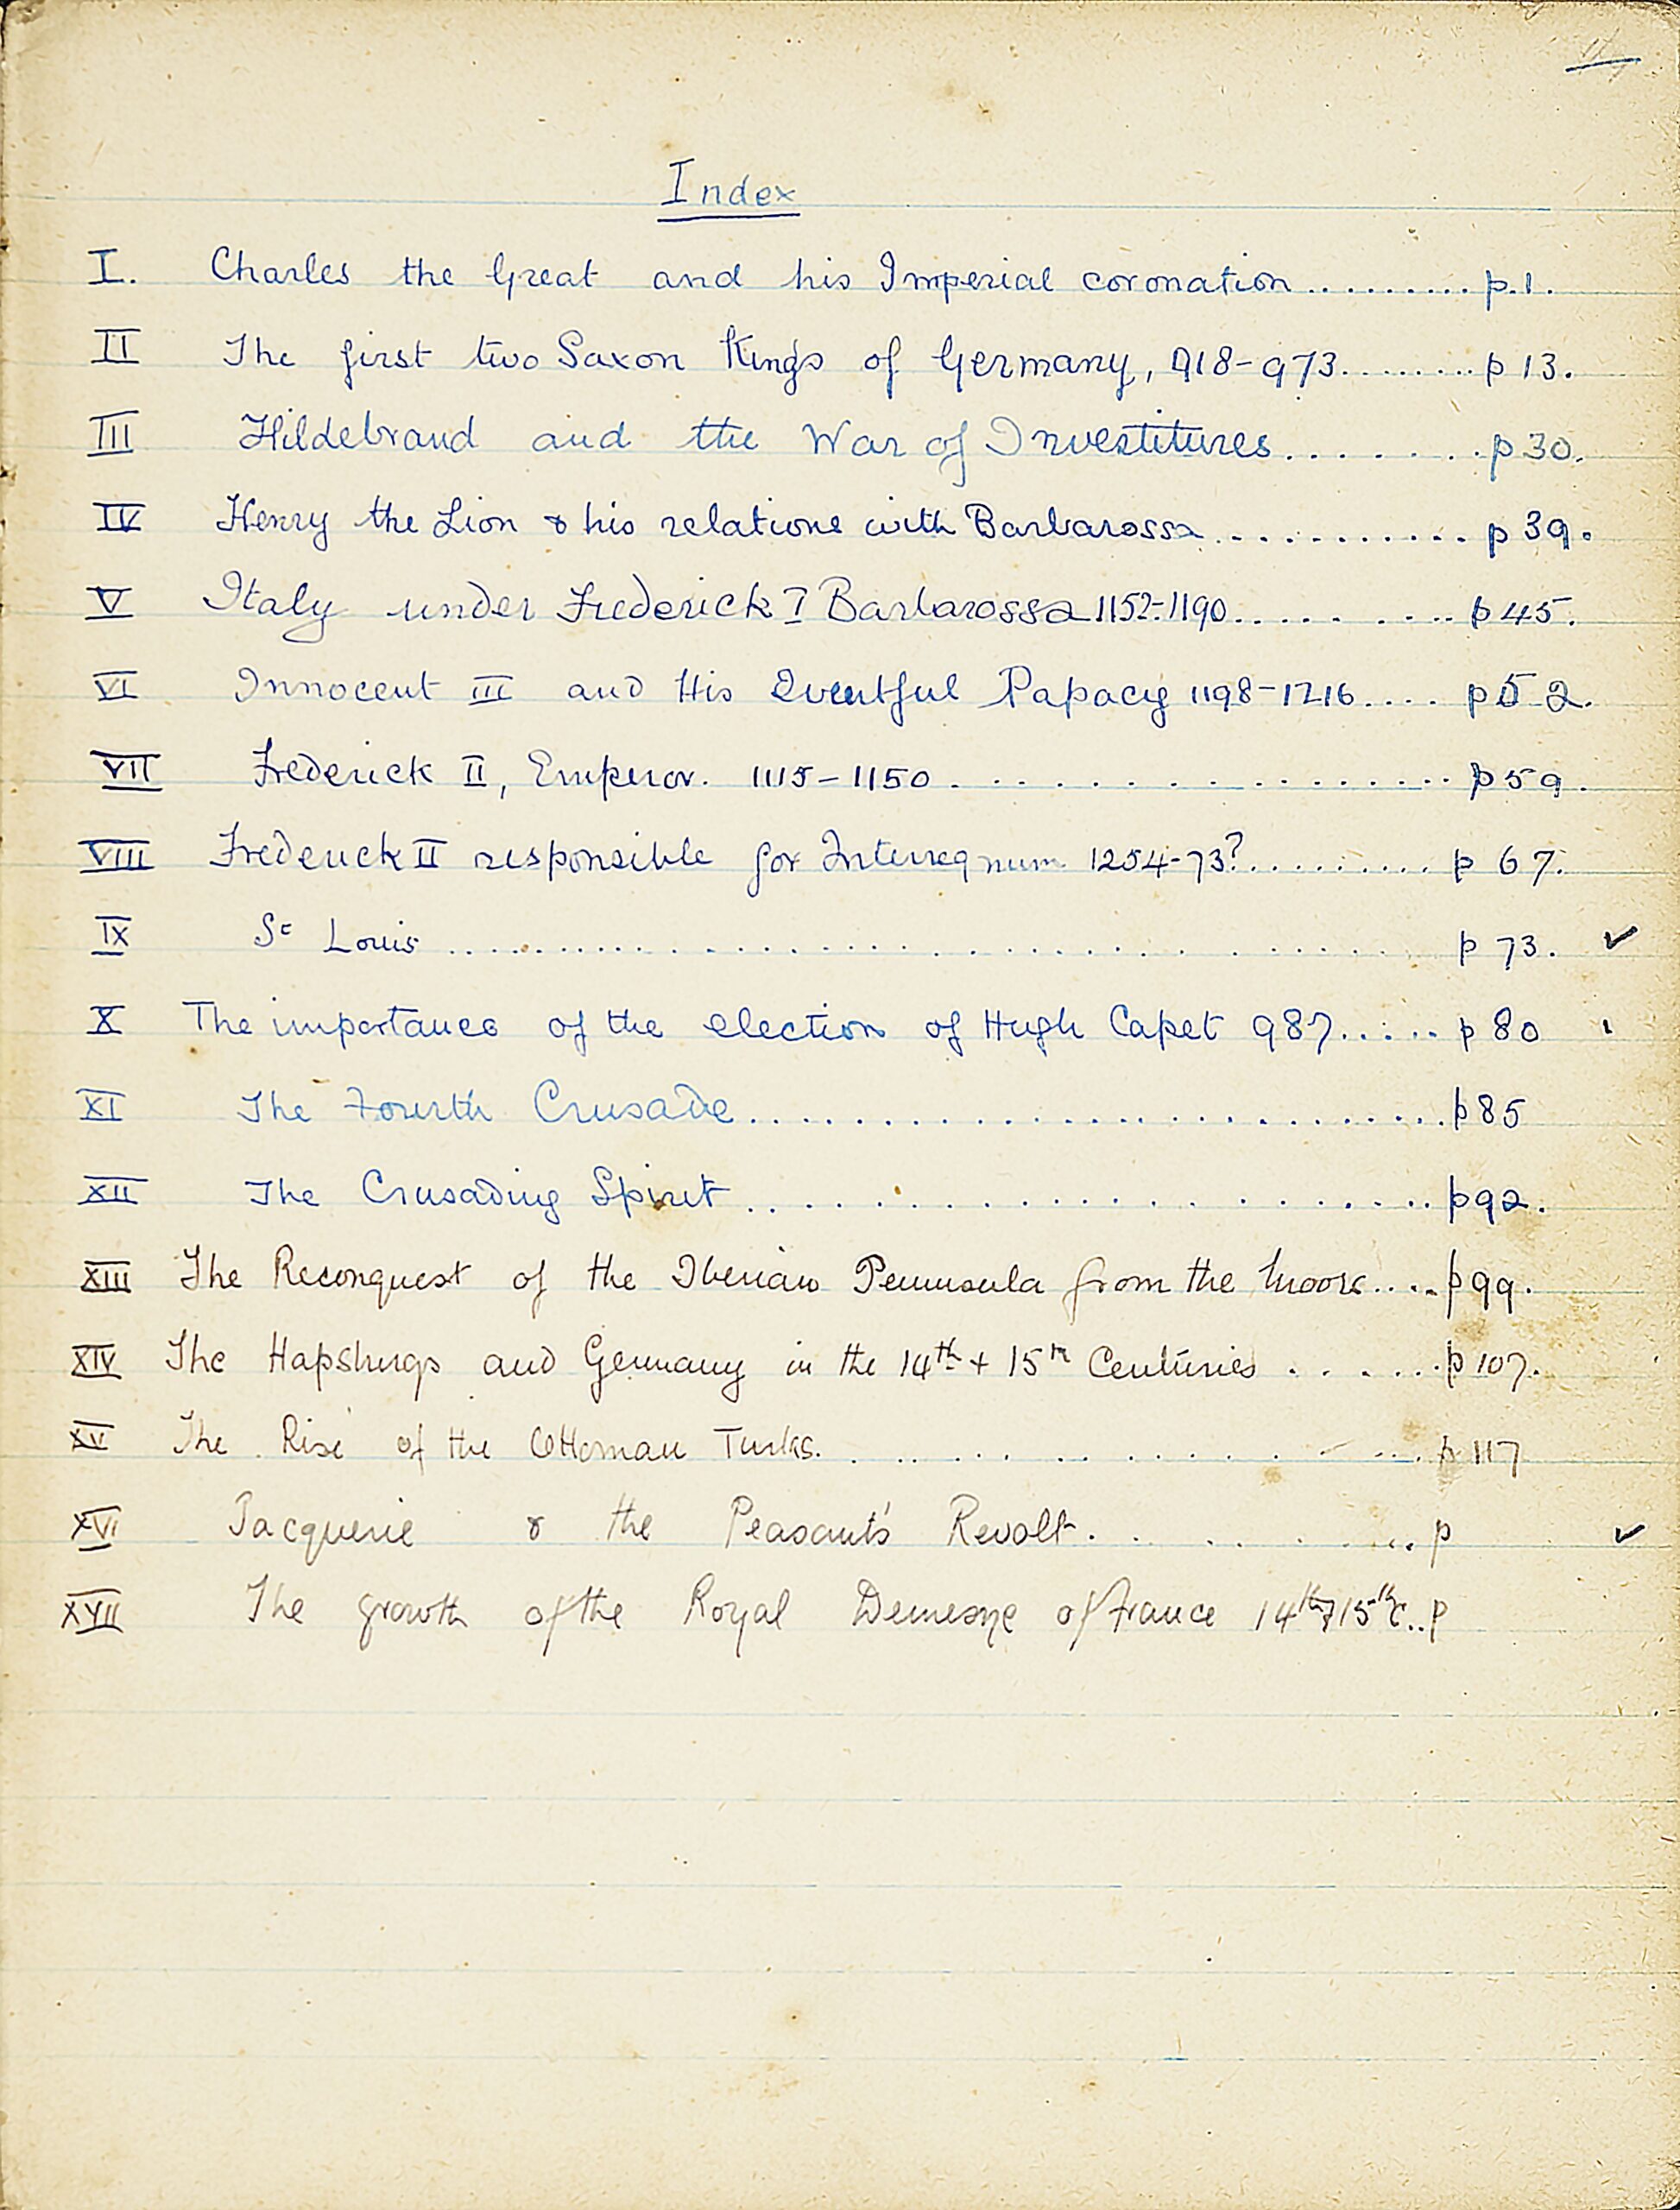 Contents page (though labelled index) detailing the titles of essays and which page they're on in the notebook. Essay titles include "Innocent III and his eventful Papacy 1198-1216" (page 52) and "The crusading spirit" (page 92)